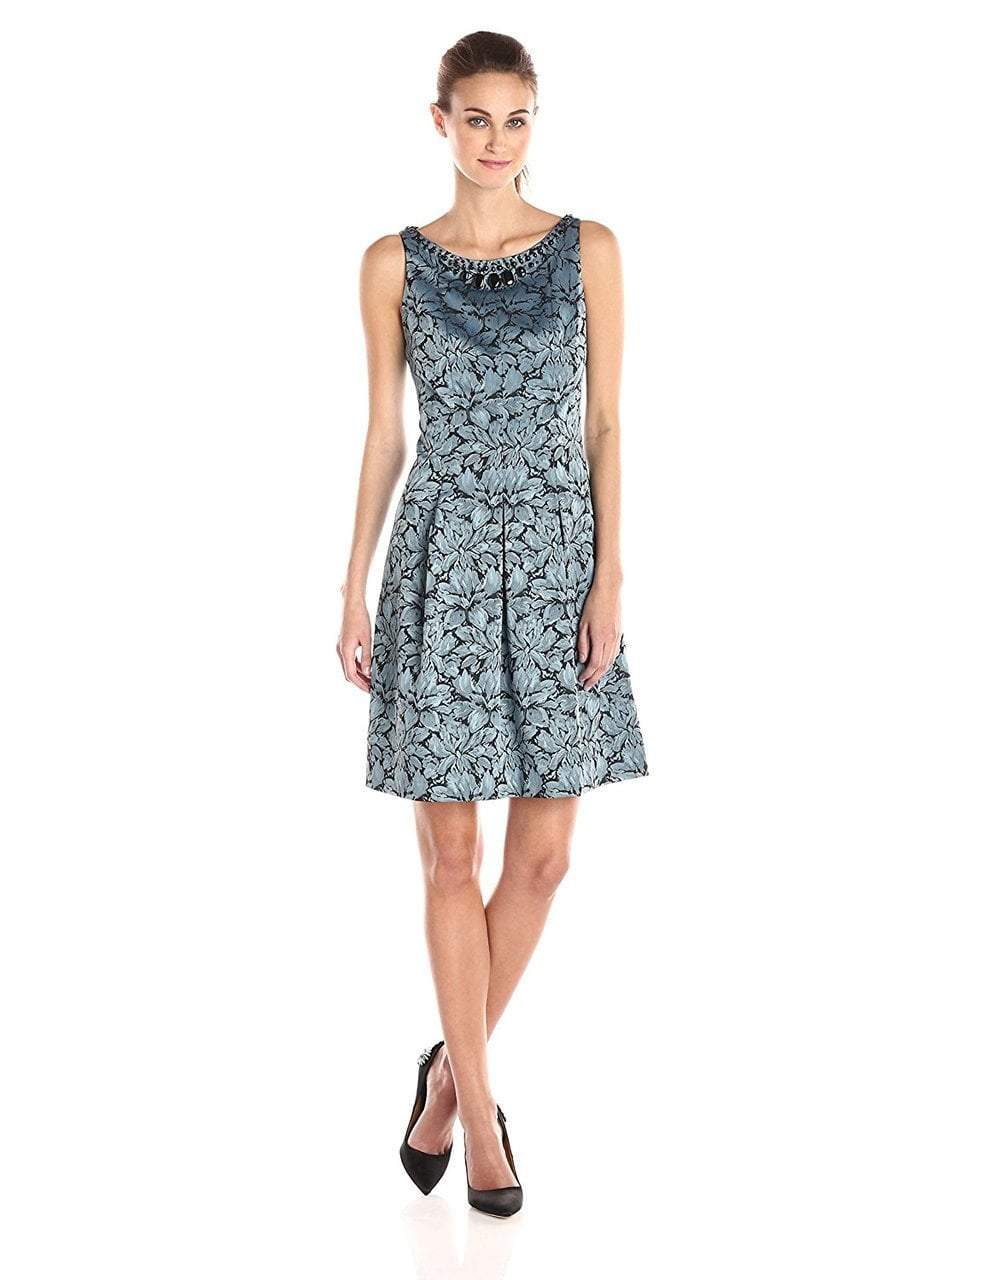 Image of Adrianna Papell - Floral Print Jacquard Short Dress 15252820